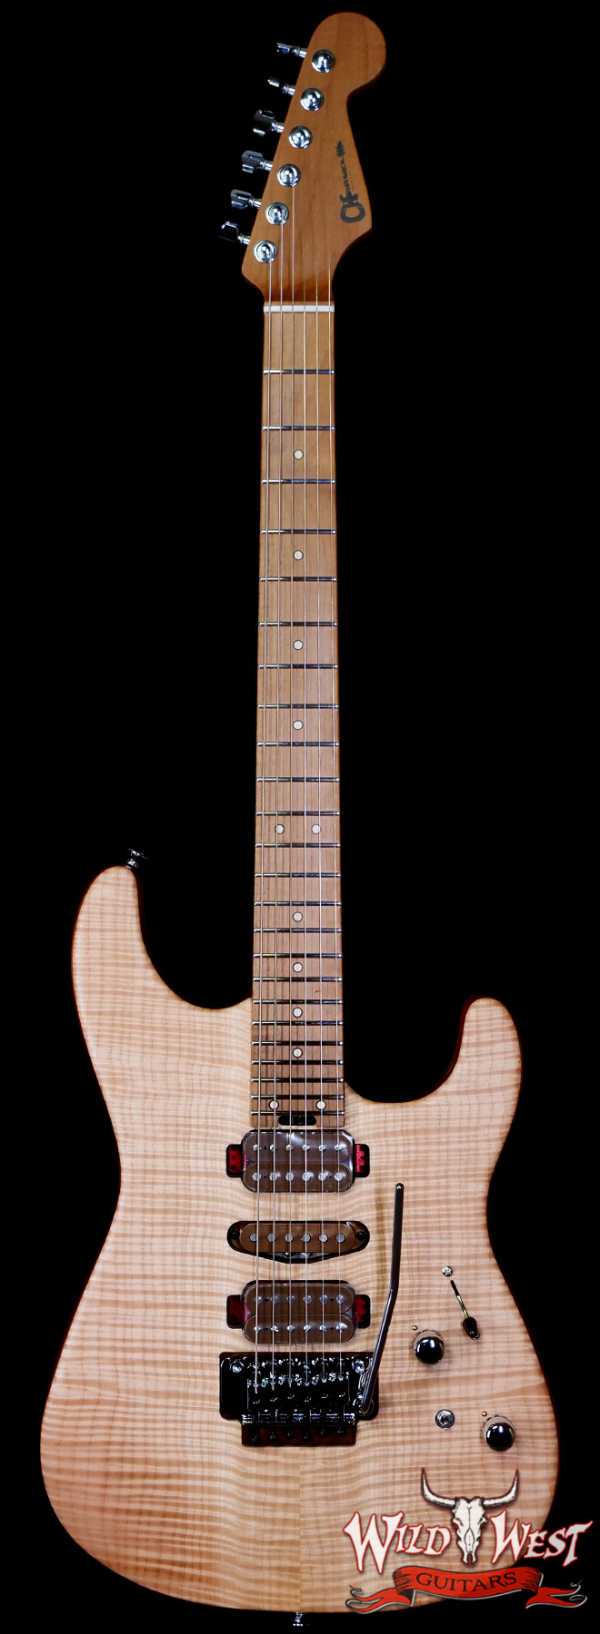 Charvel Custom Shop Guthrie Govan USA Signature HSH Flame Maple Top Caramelized Basswood Body Natural 7.65 LBS